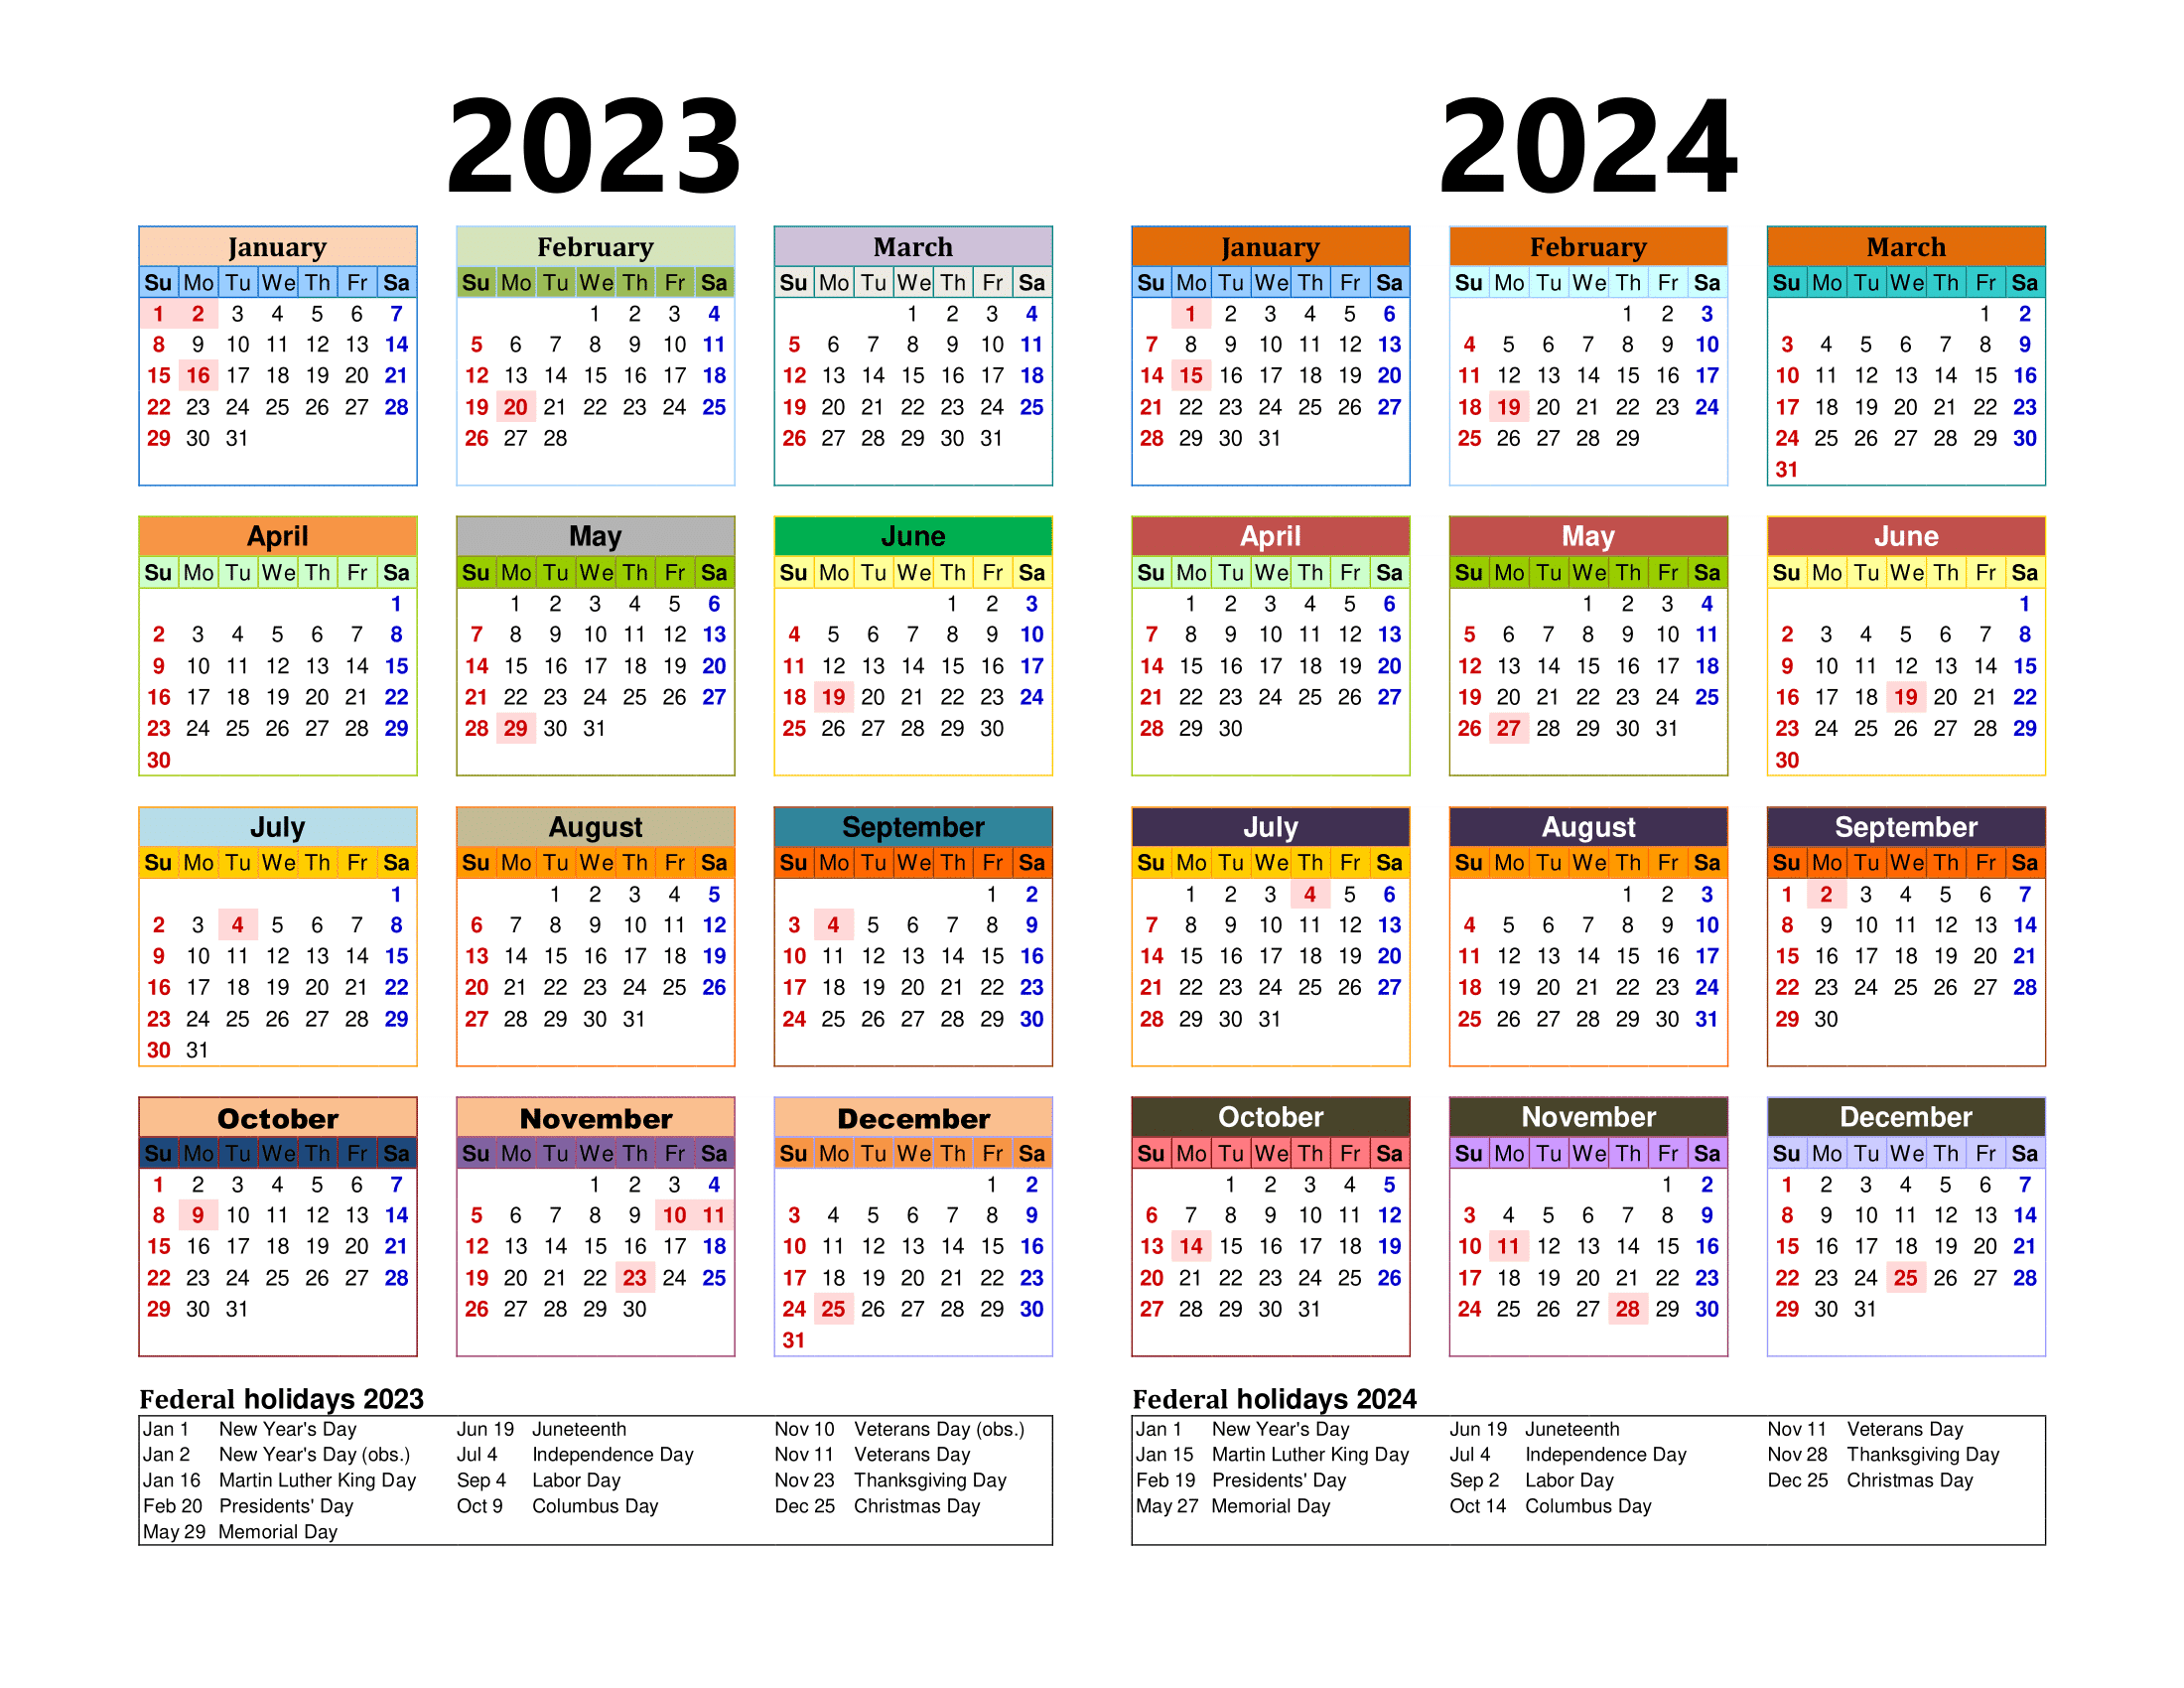 Free Printable Two Year Calendar Templates for 2023 and 2024 in PDF